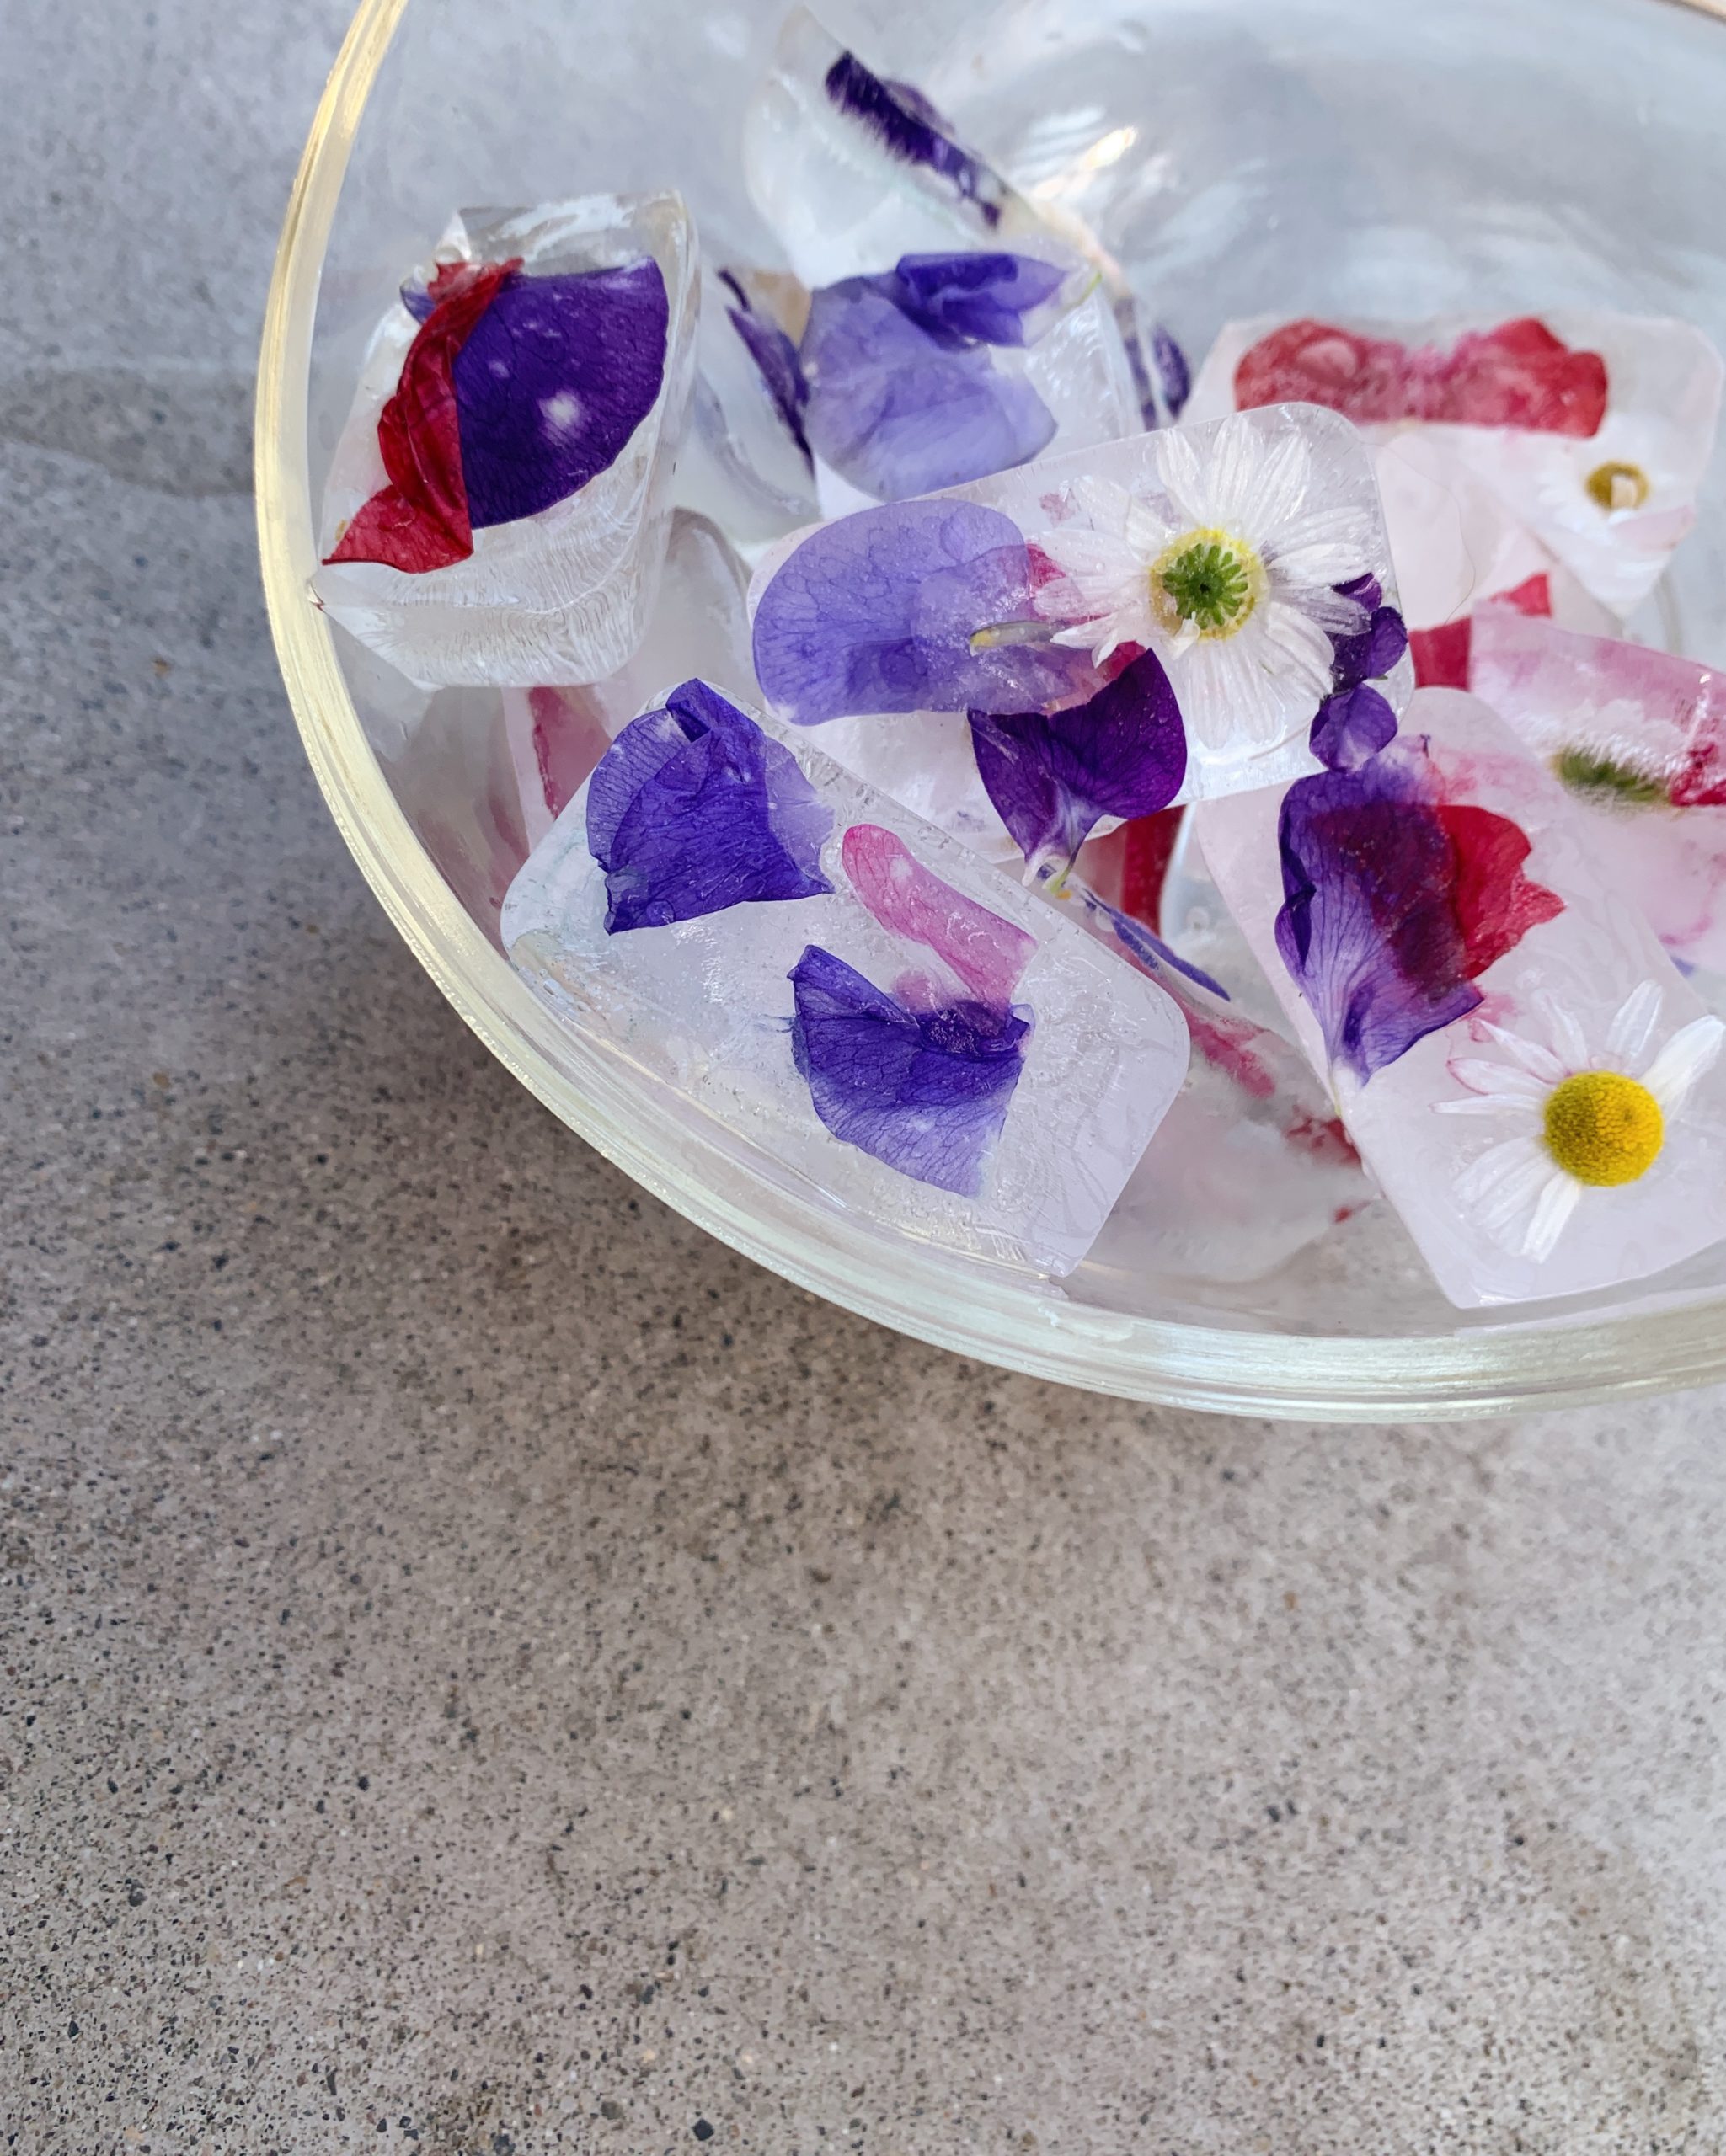 More Floral Ice Cubes